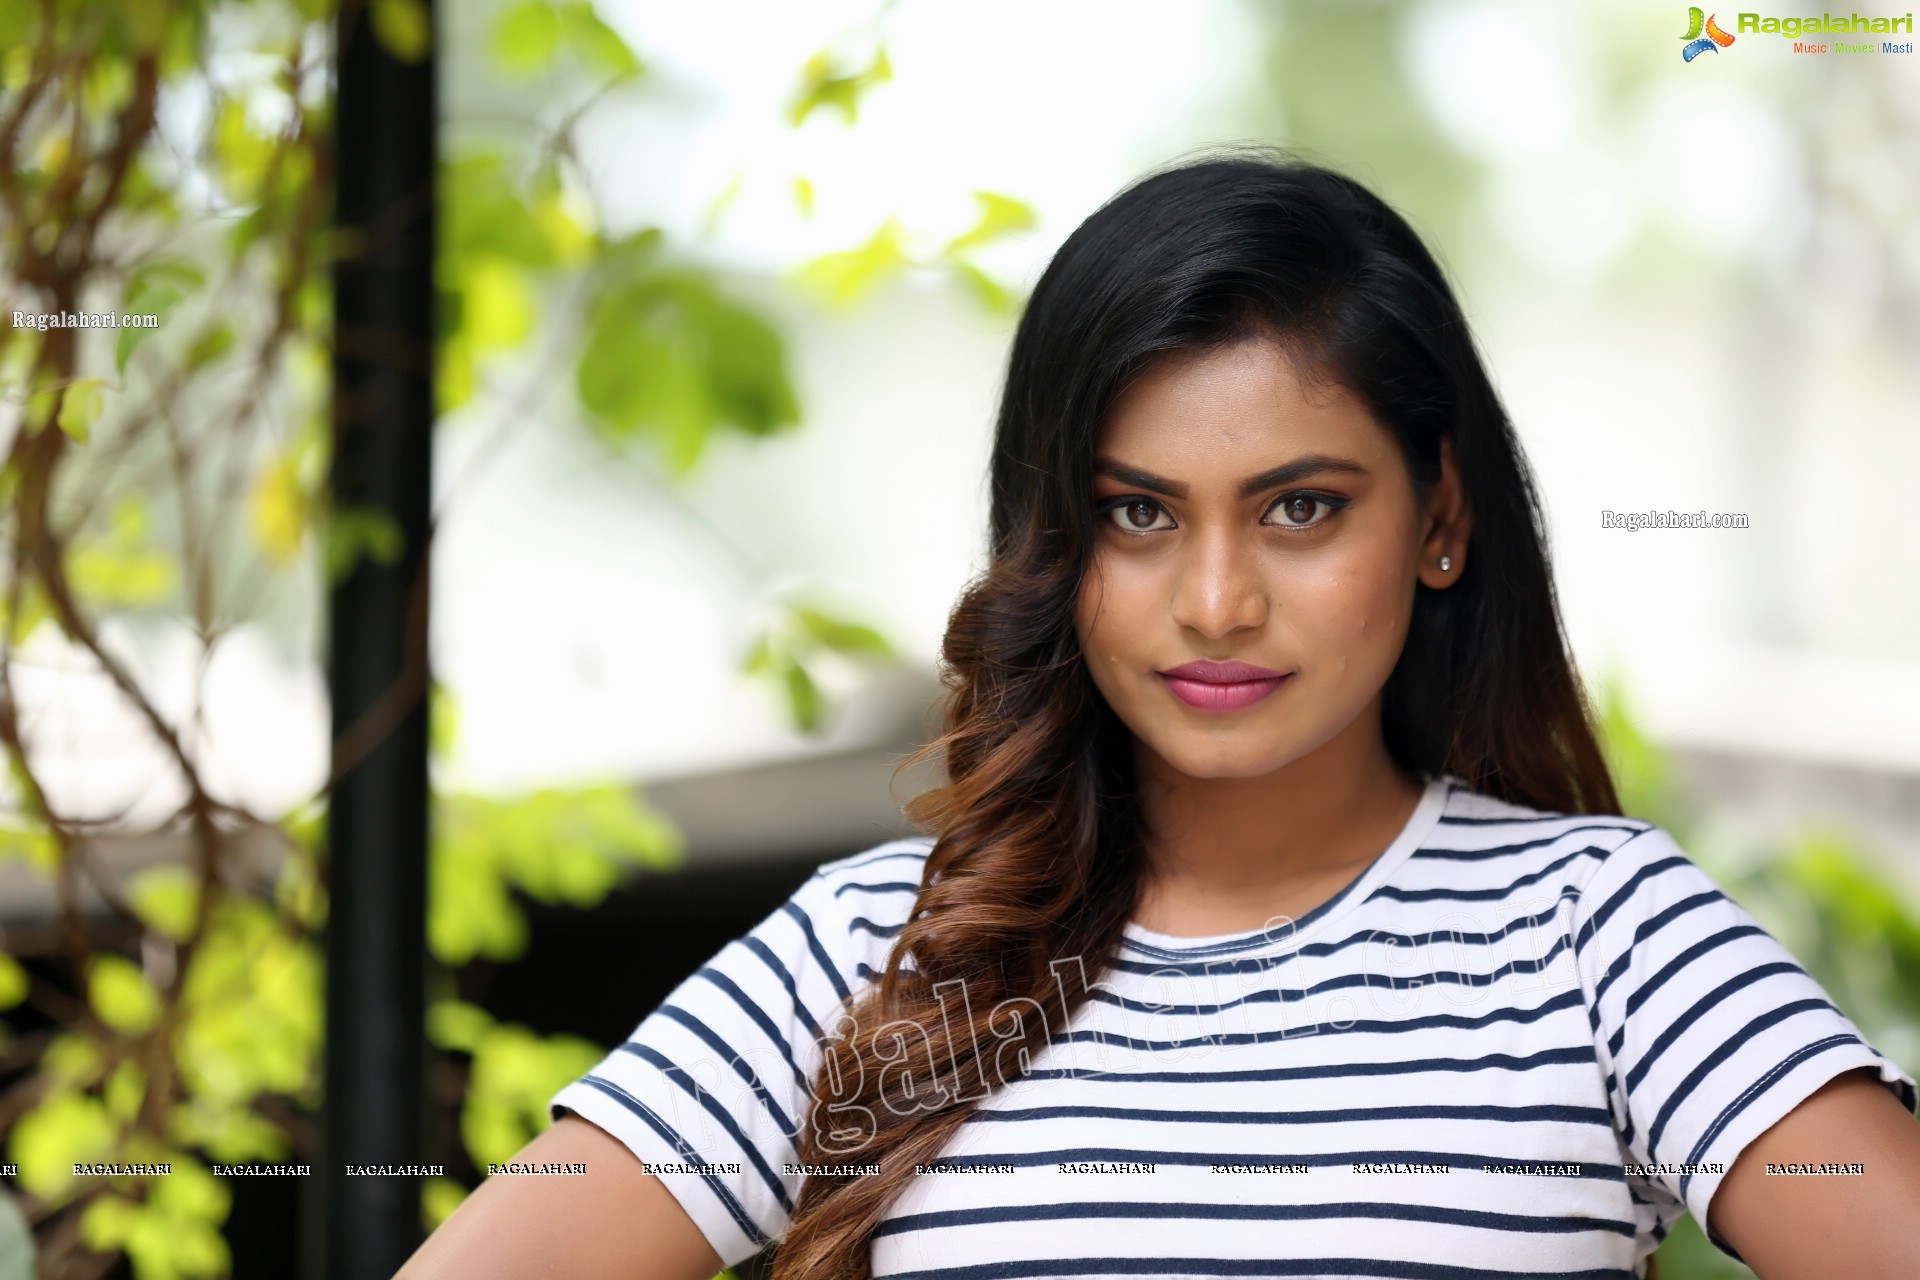 Priyanka Augustin in White Striped Top and Shorts, Exclusive Photo Shoot